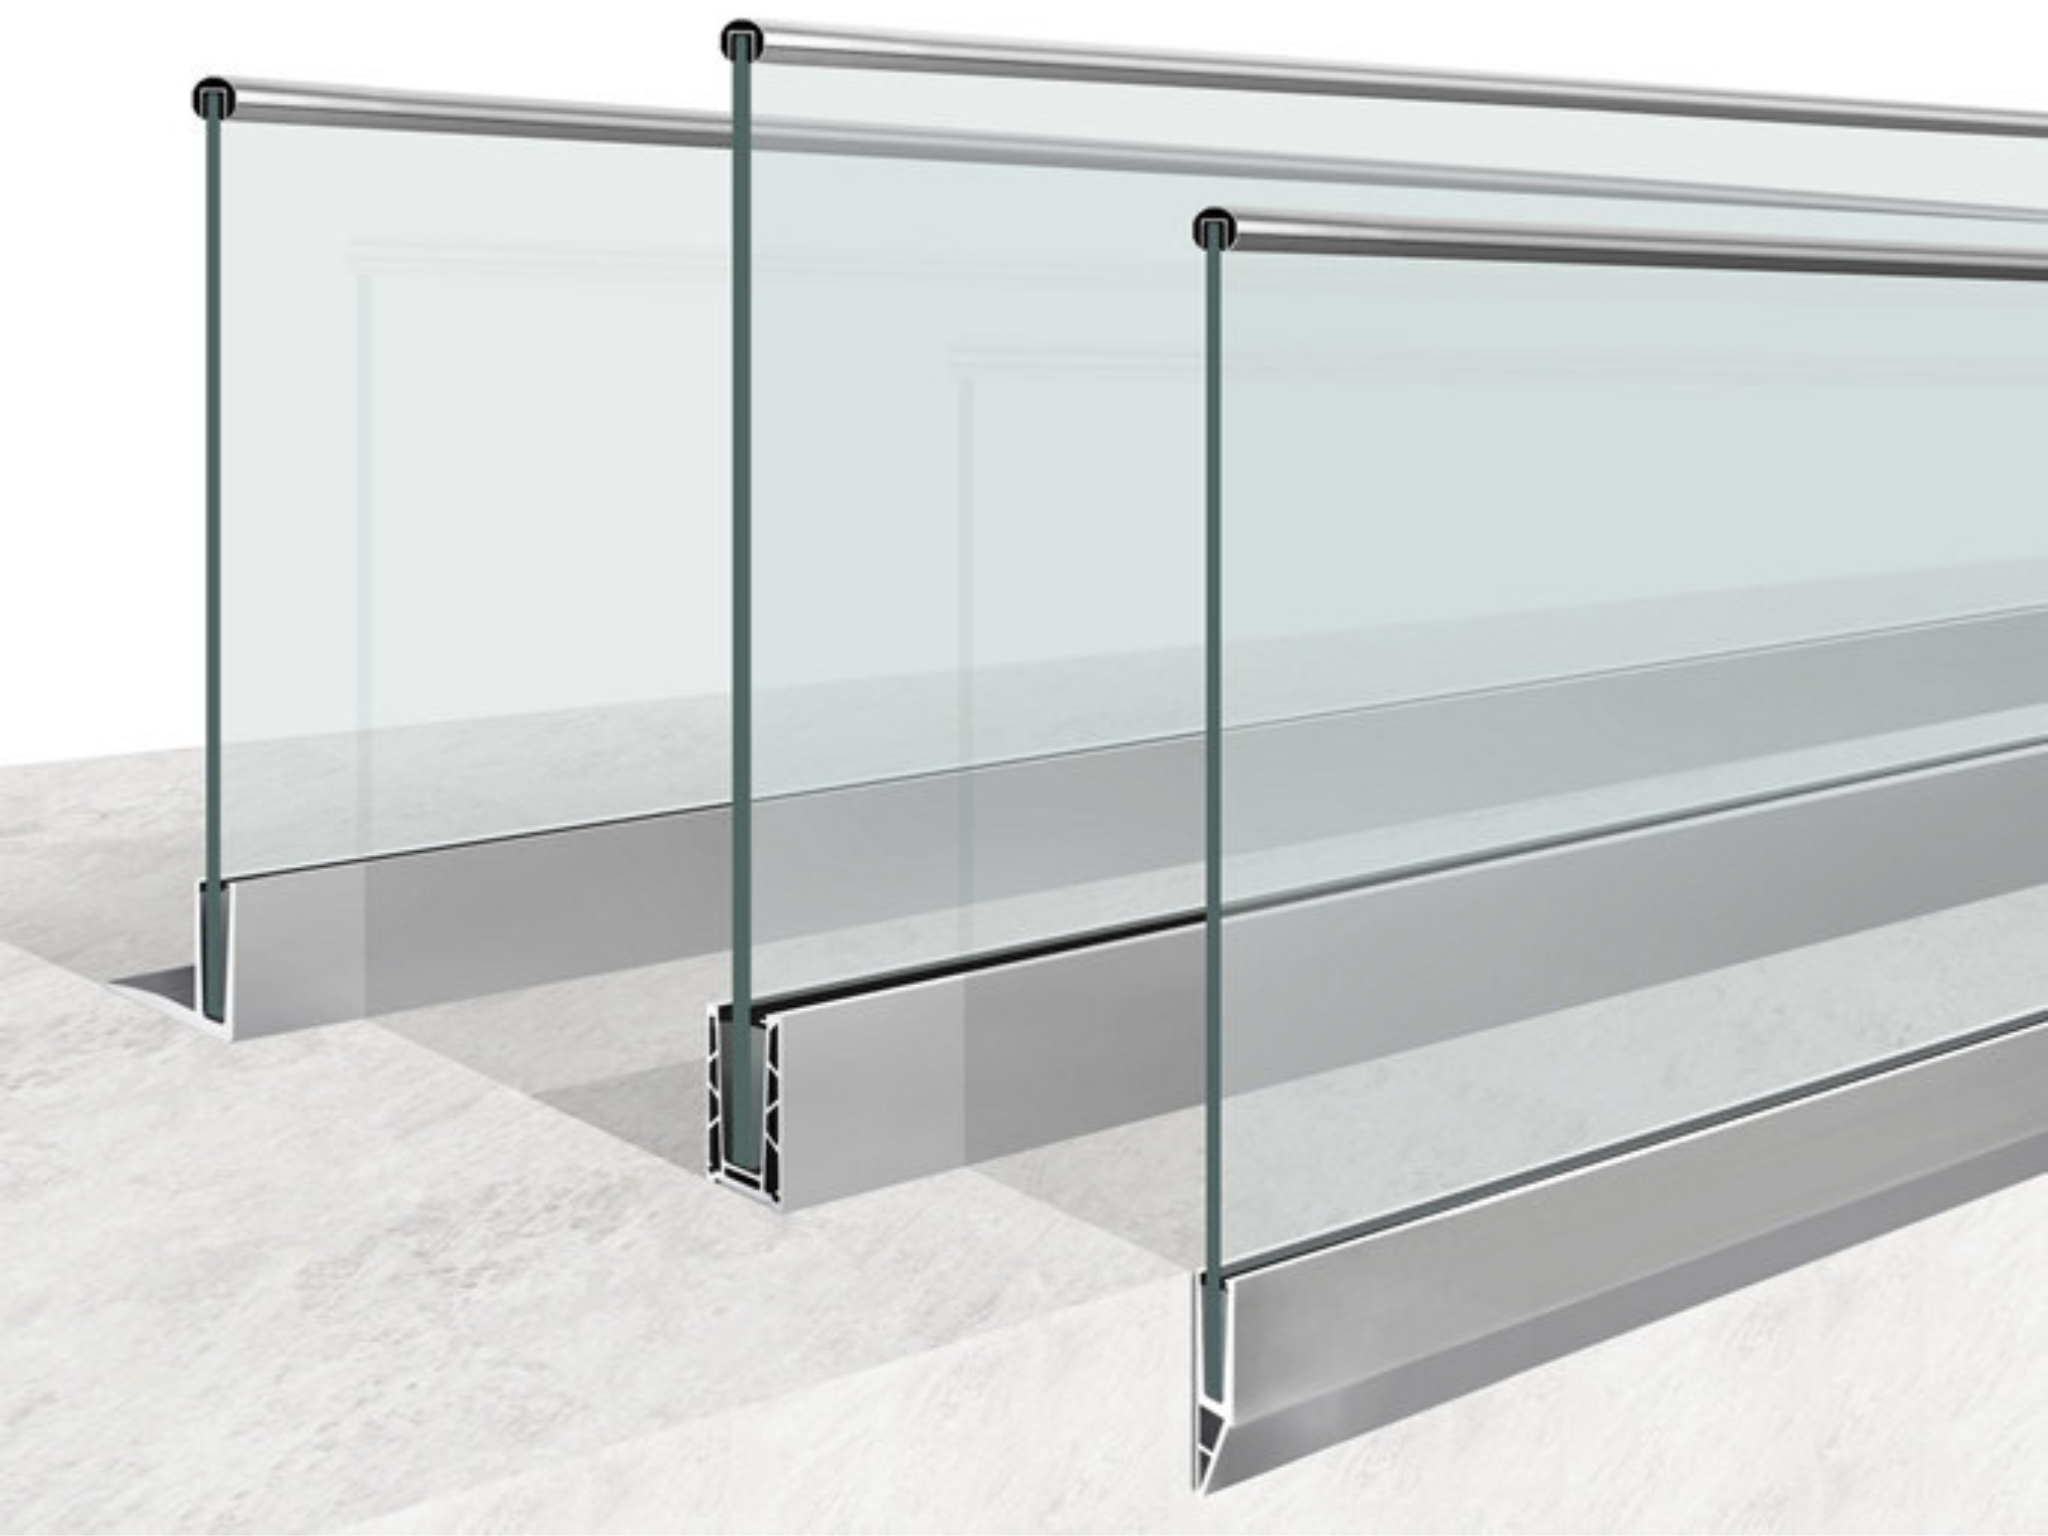 Channel mount frameless glass balustrade with top rail